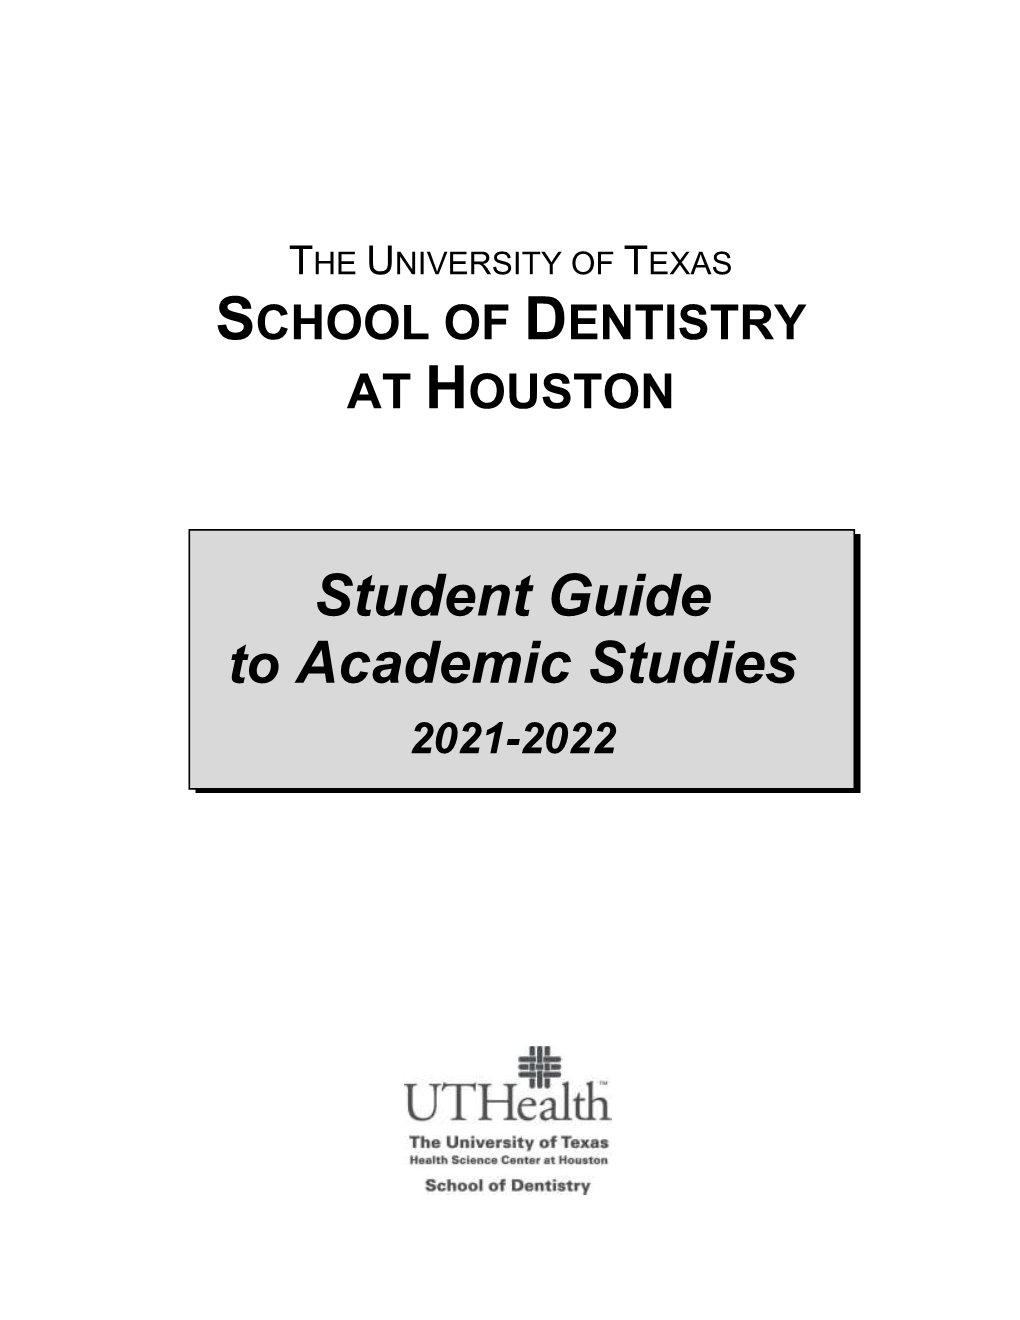 2021-2022 Student Guide to Academic Studies